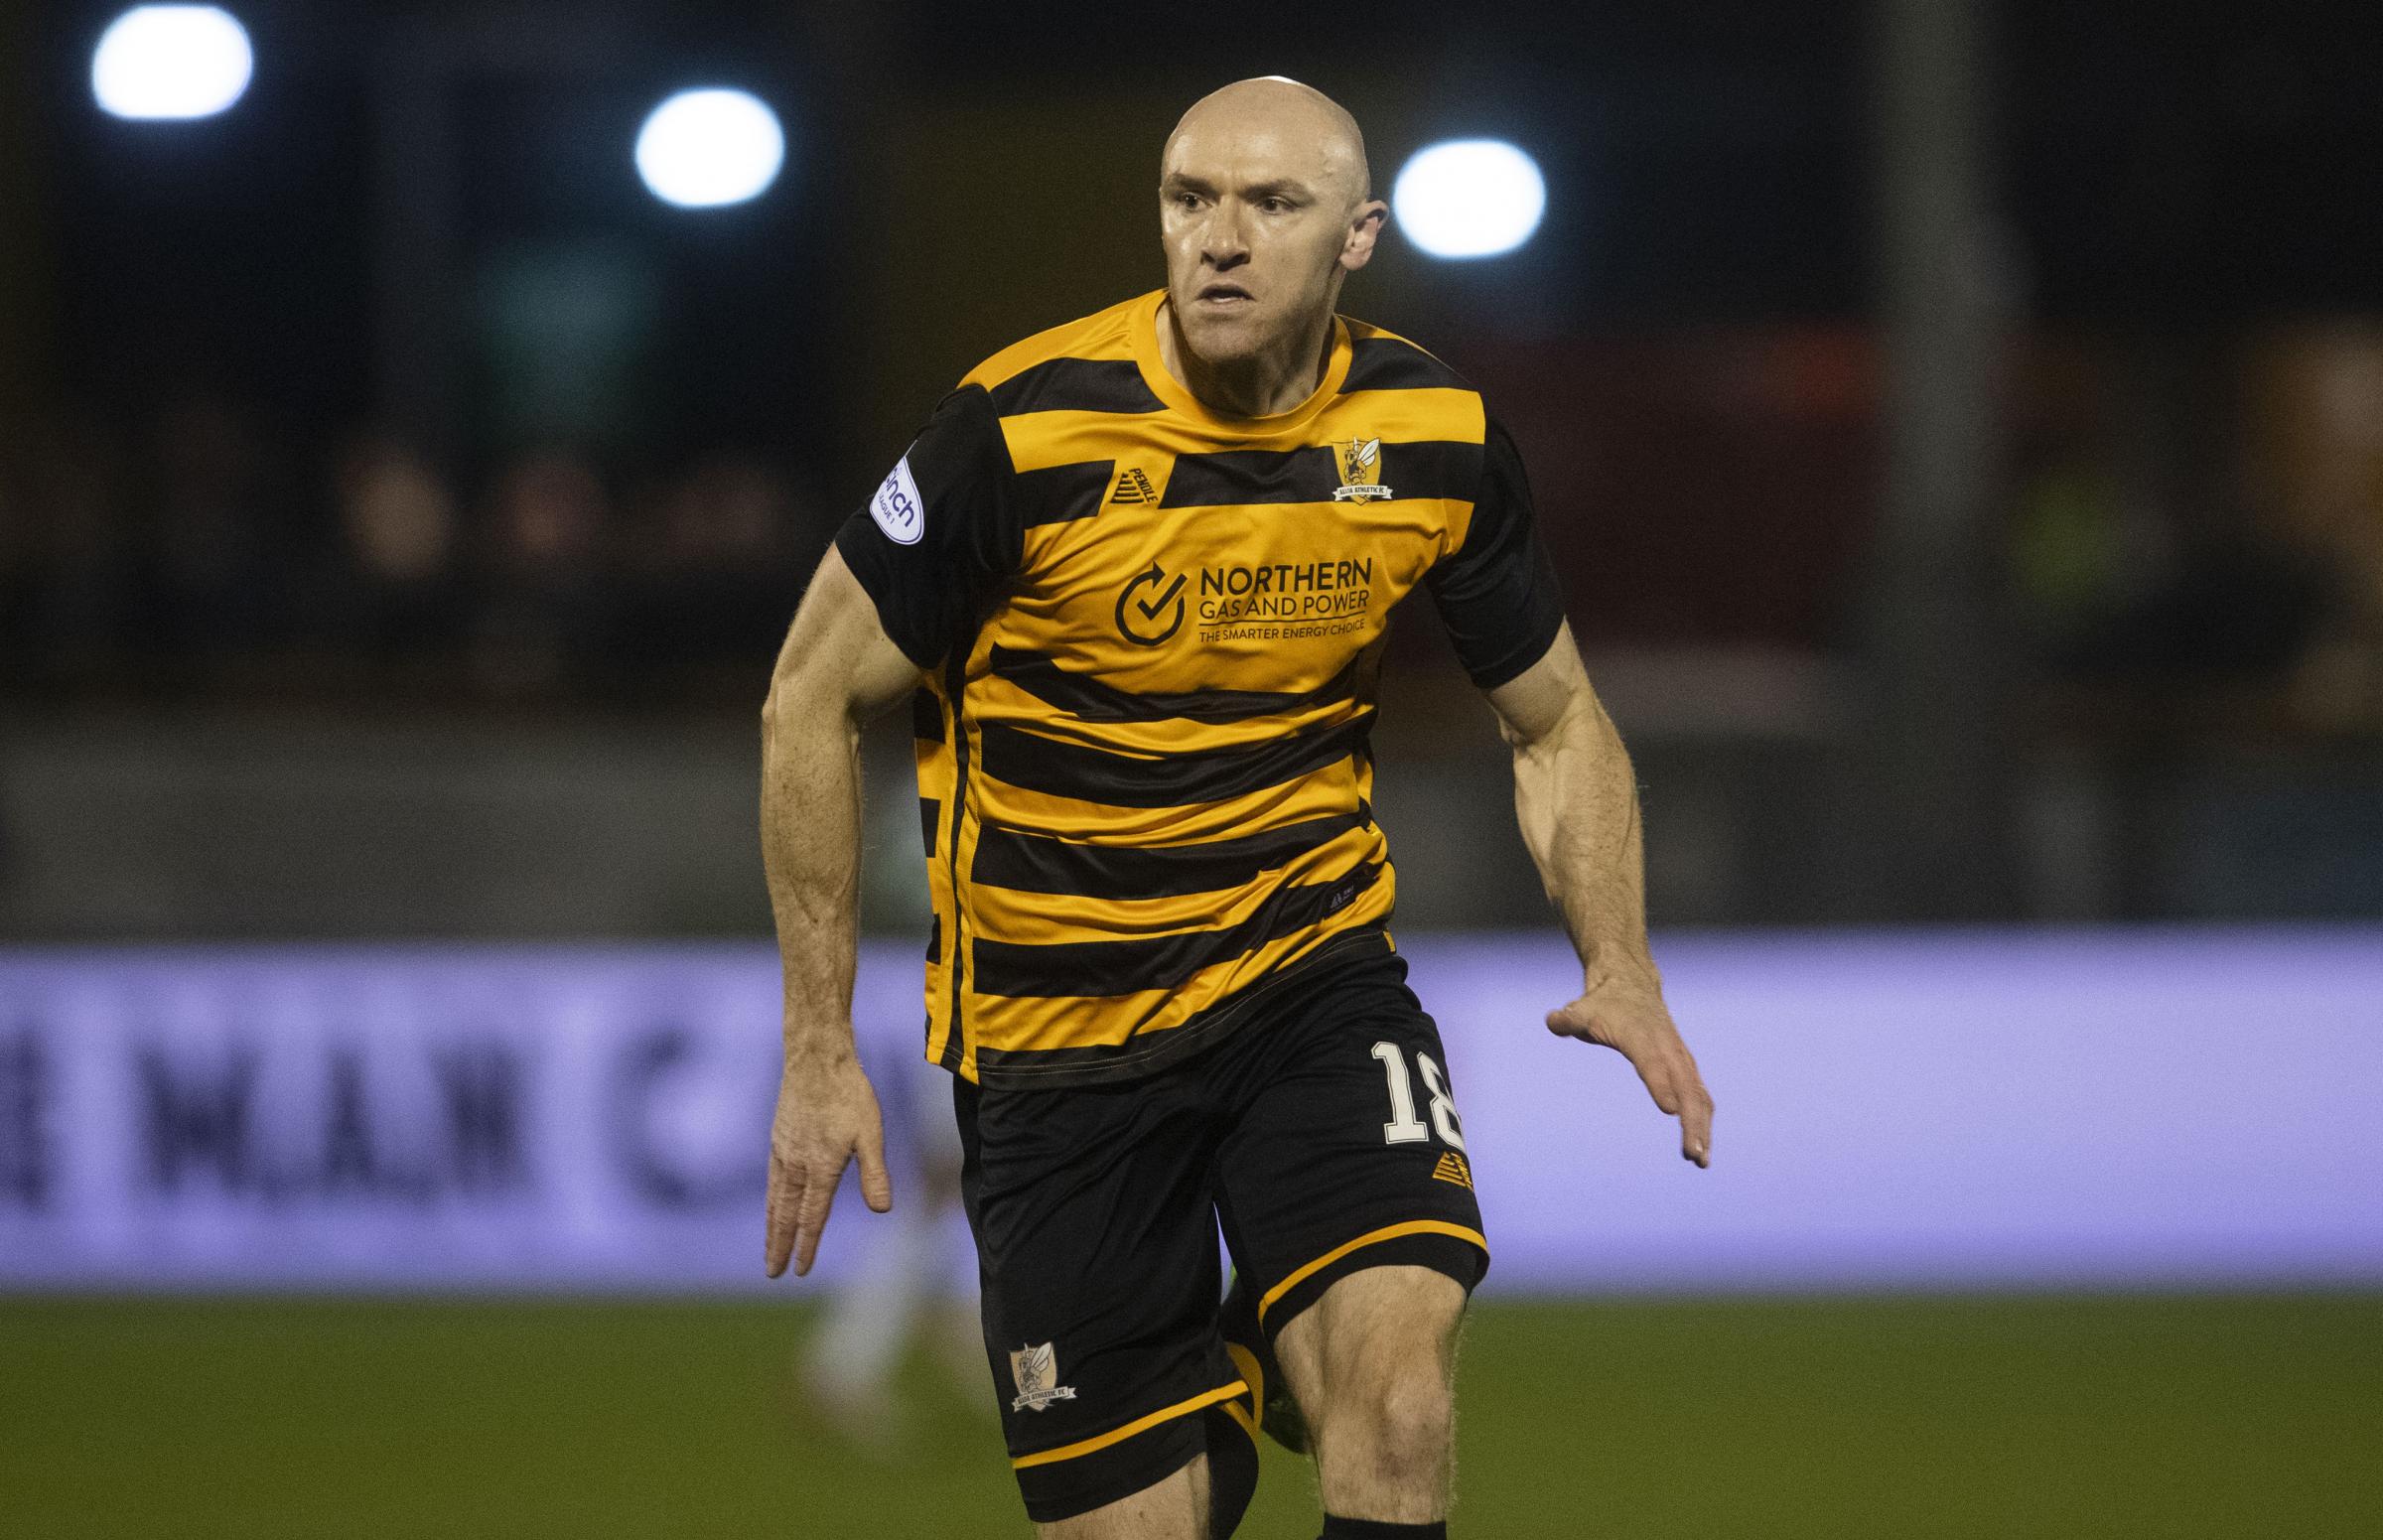 Alloa spurn chances as Falkirk seal victory in second half rout